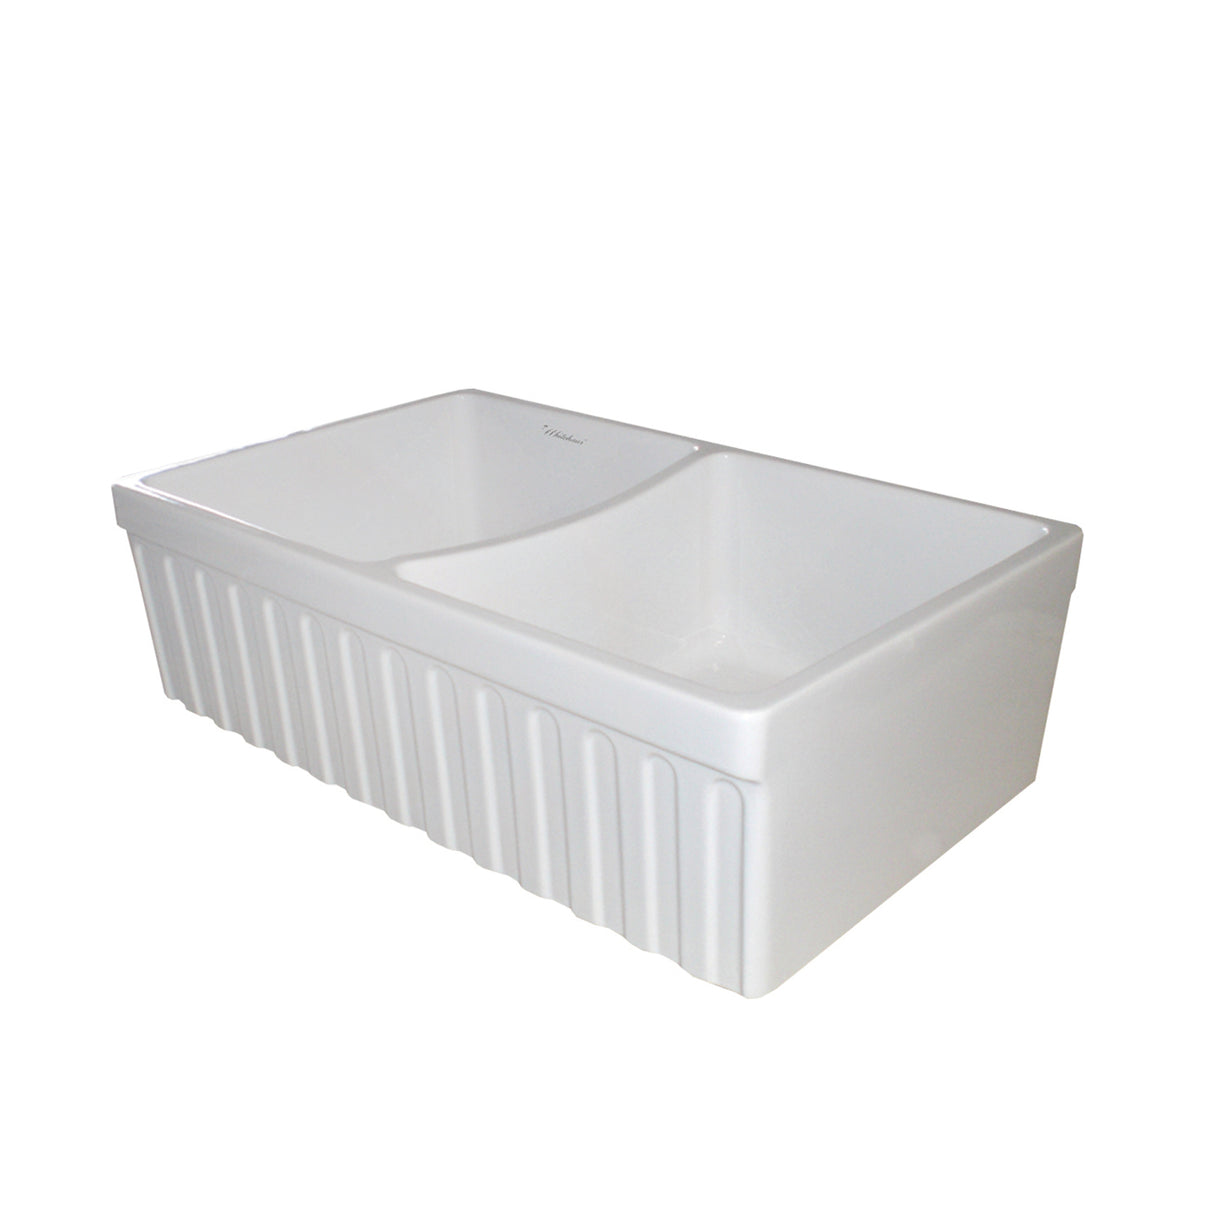 Farmhaus Fireclay Quatro Alcove Reversible Double Bowl Sink with a Fluted Front Apron and 2" Lip on One Side and 2 ½" Lip on the Opposite Side